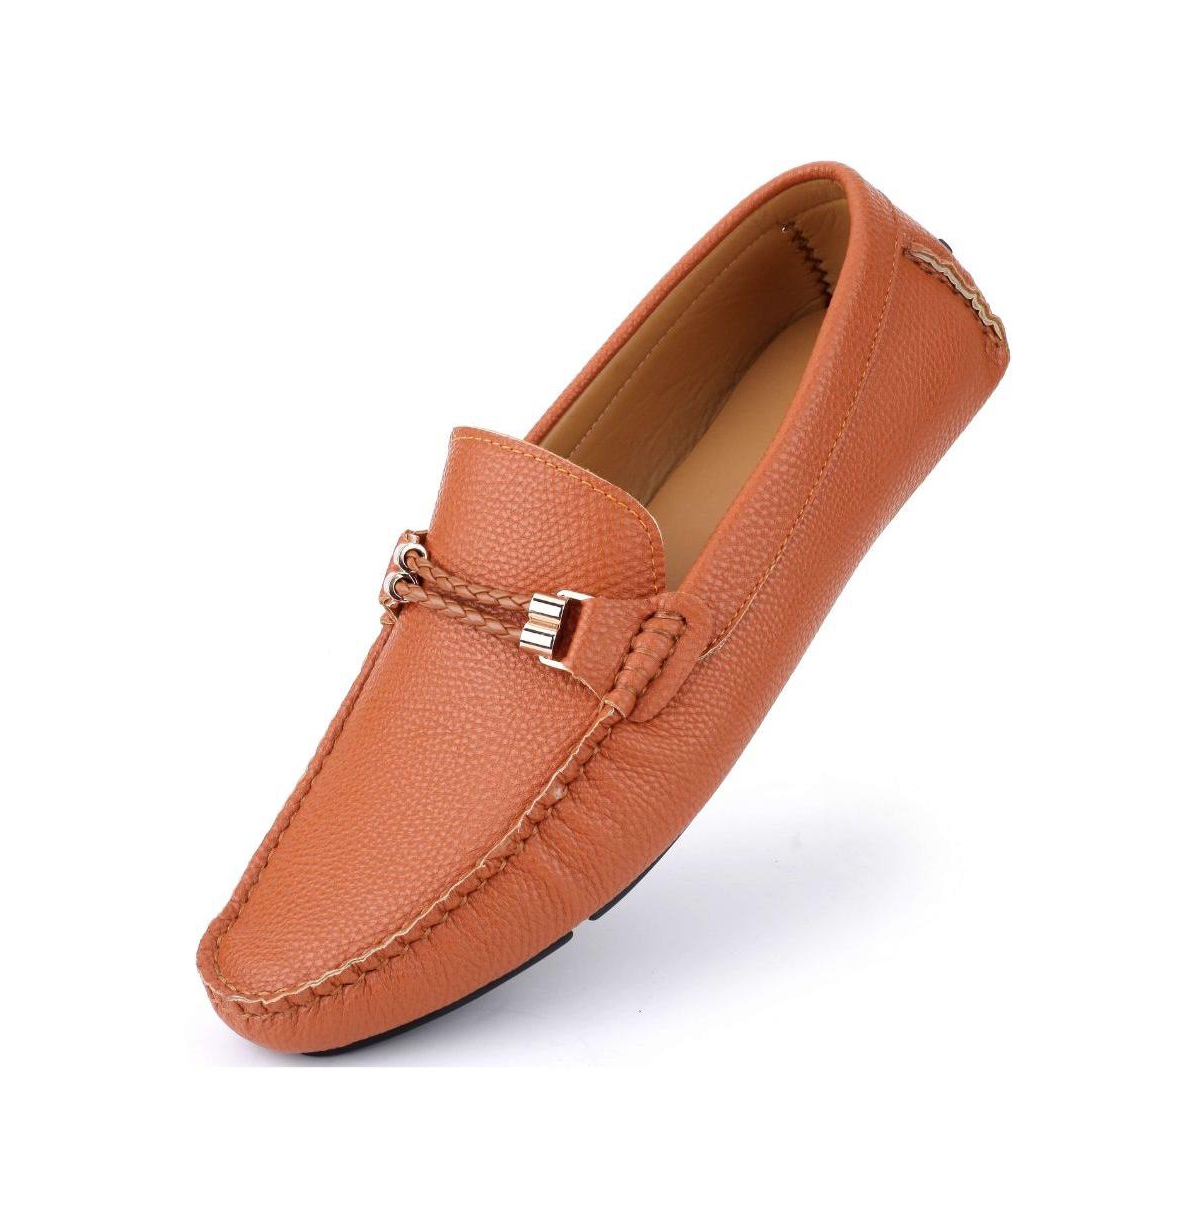 Men's Speckled Leather Casual Loafers - Bronze amber